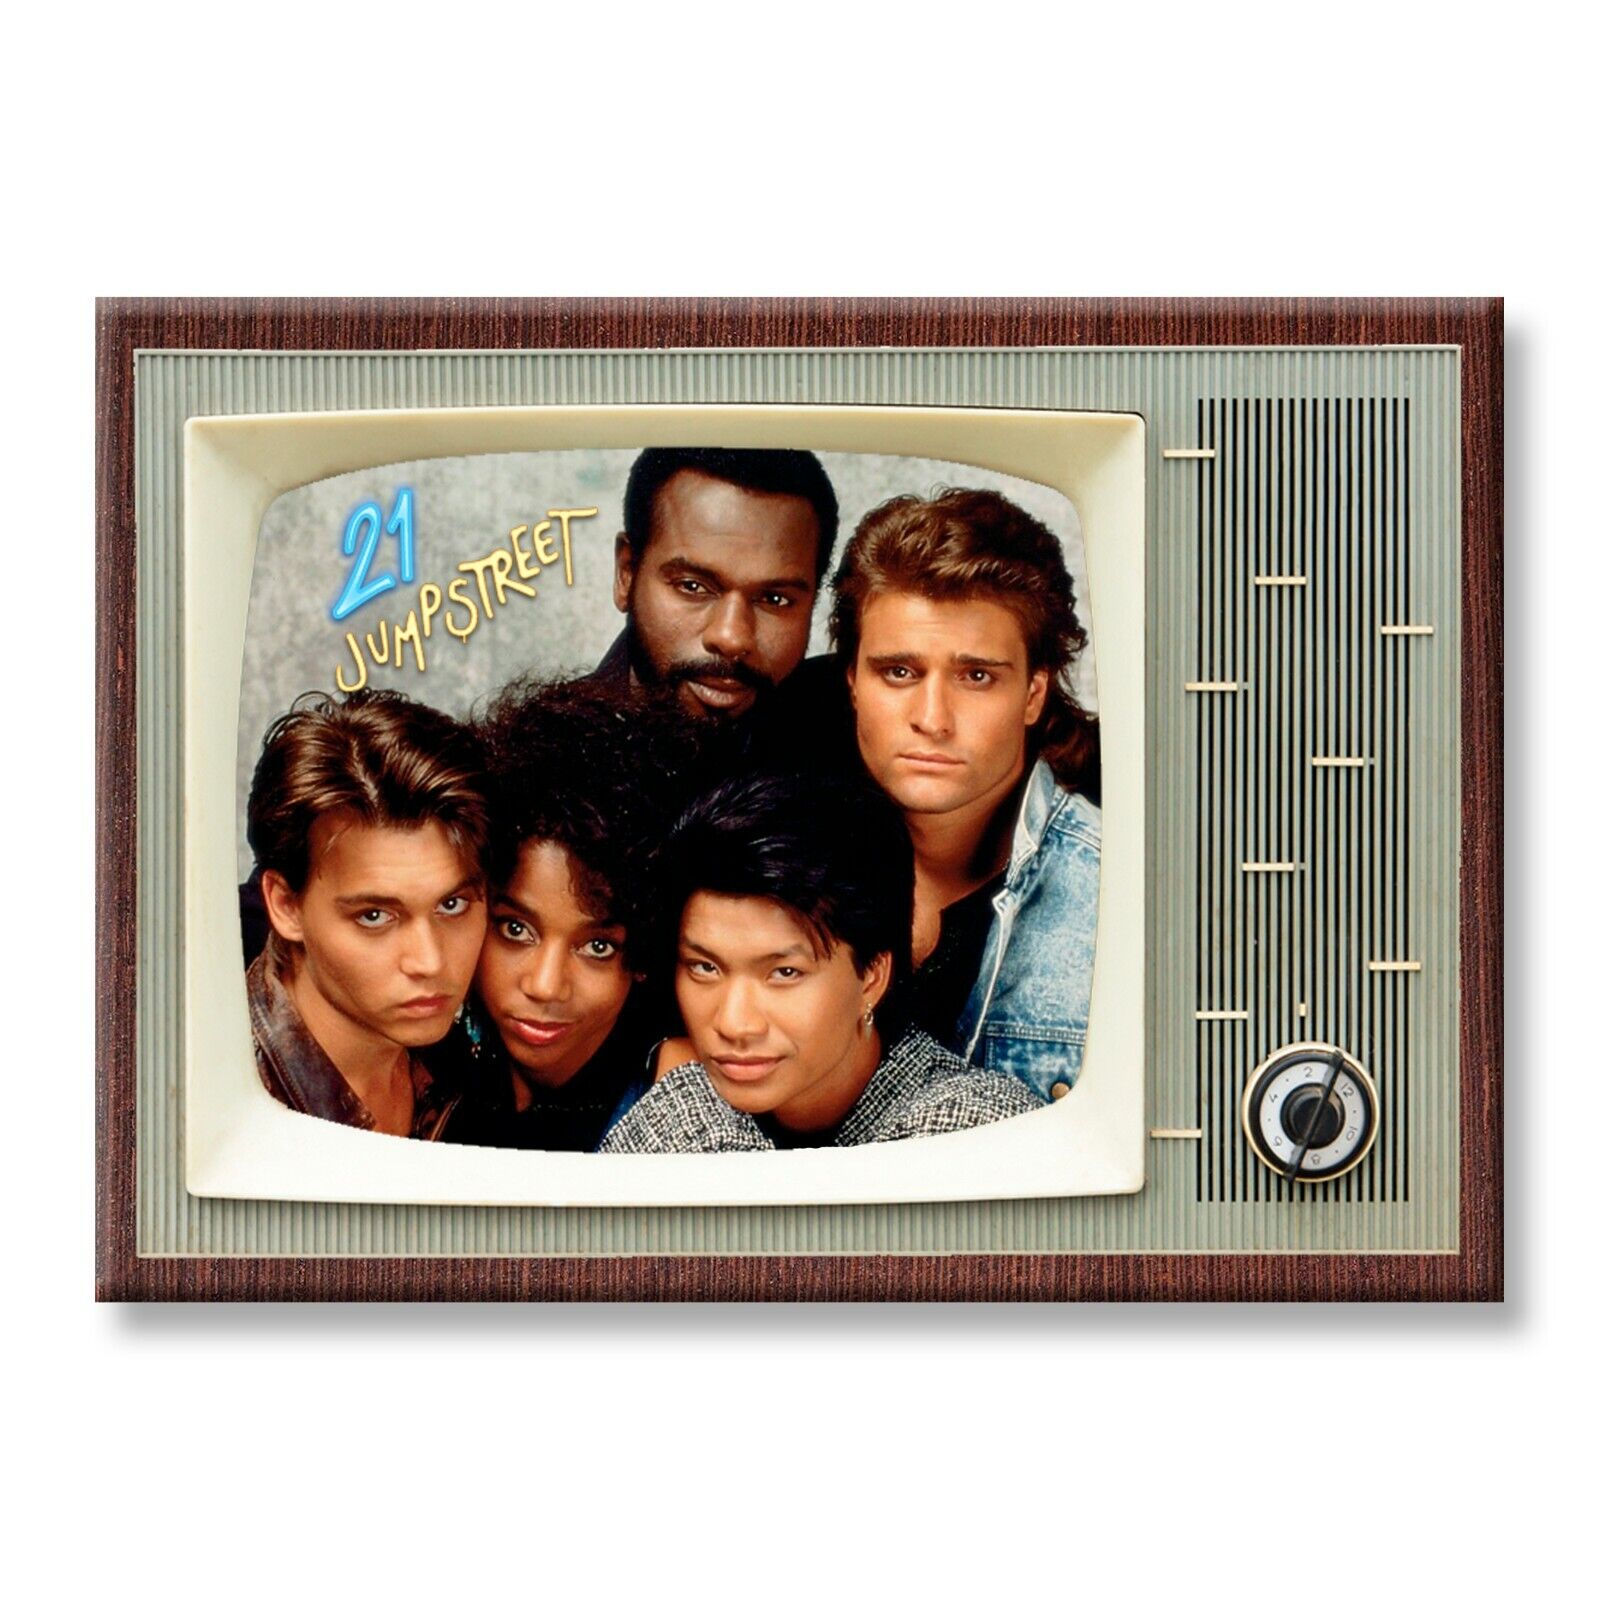 21 JUMP STREET TV Show Classic TV 3.5 inches x 2.5 inches FRIDGE MAGNET